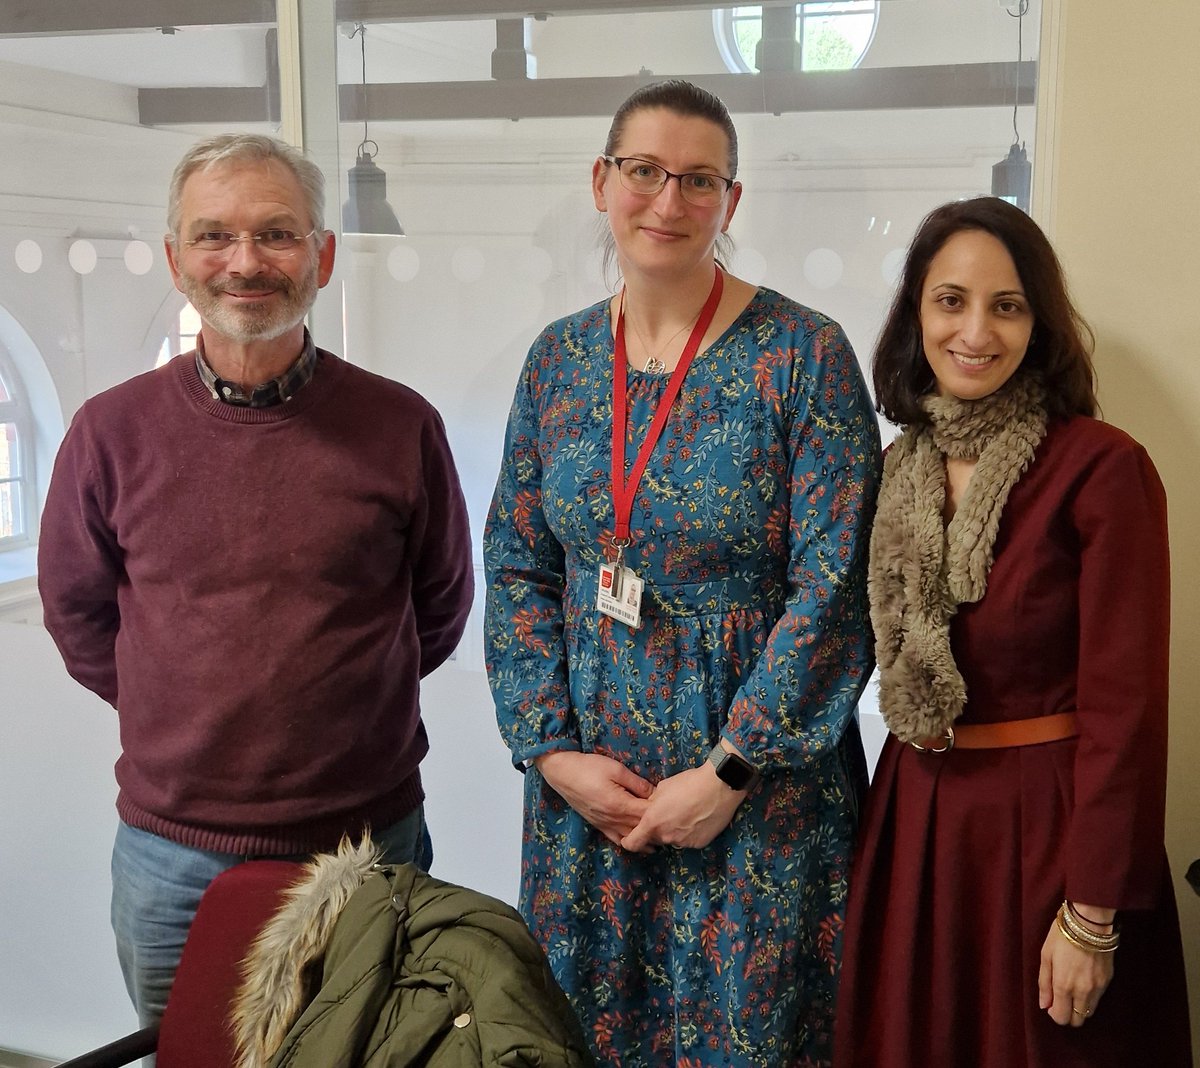 A group outing for lunch today to celebrate Miriam's successful PhD viva this week. Many congratulations Miriam!! 🍾 Our thanks go to external examiners Prof Munshi and Prof Beckett. @USWResearch #InternationalWomensDay #PhD @KESS_Central @KESS_USW mdpi.com/1420-3049/28/1…